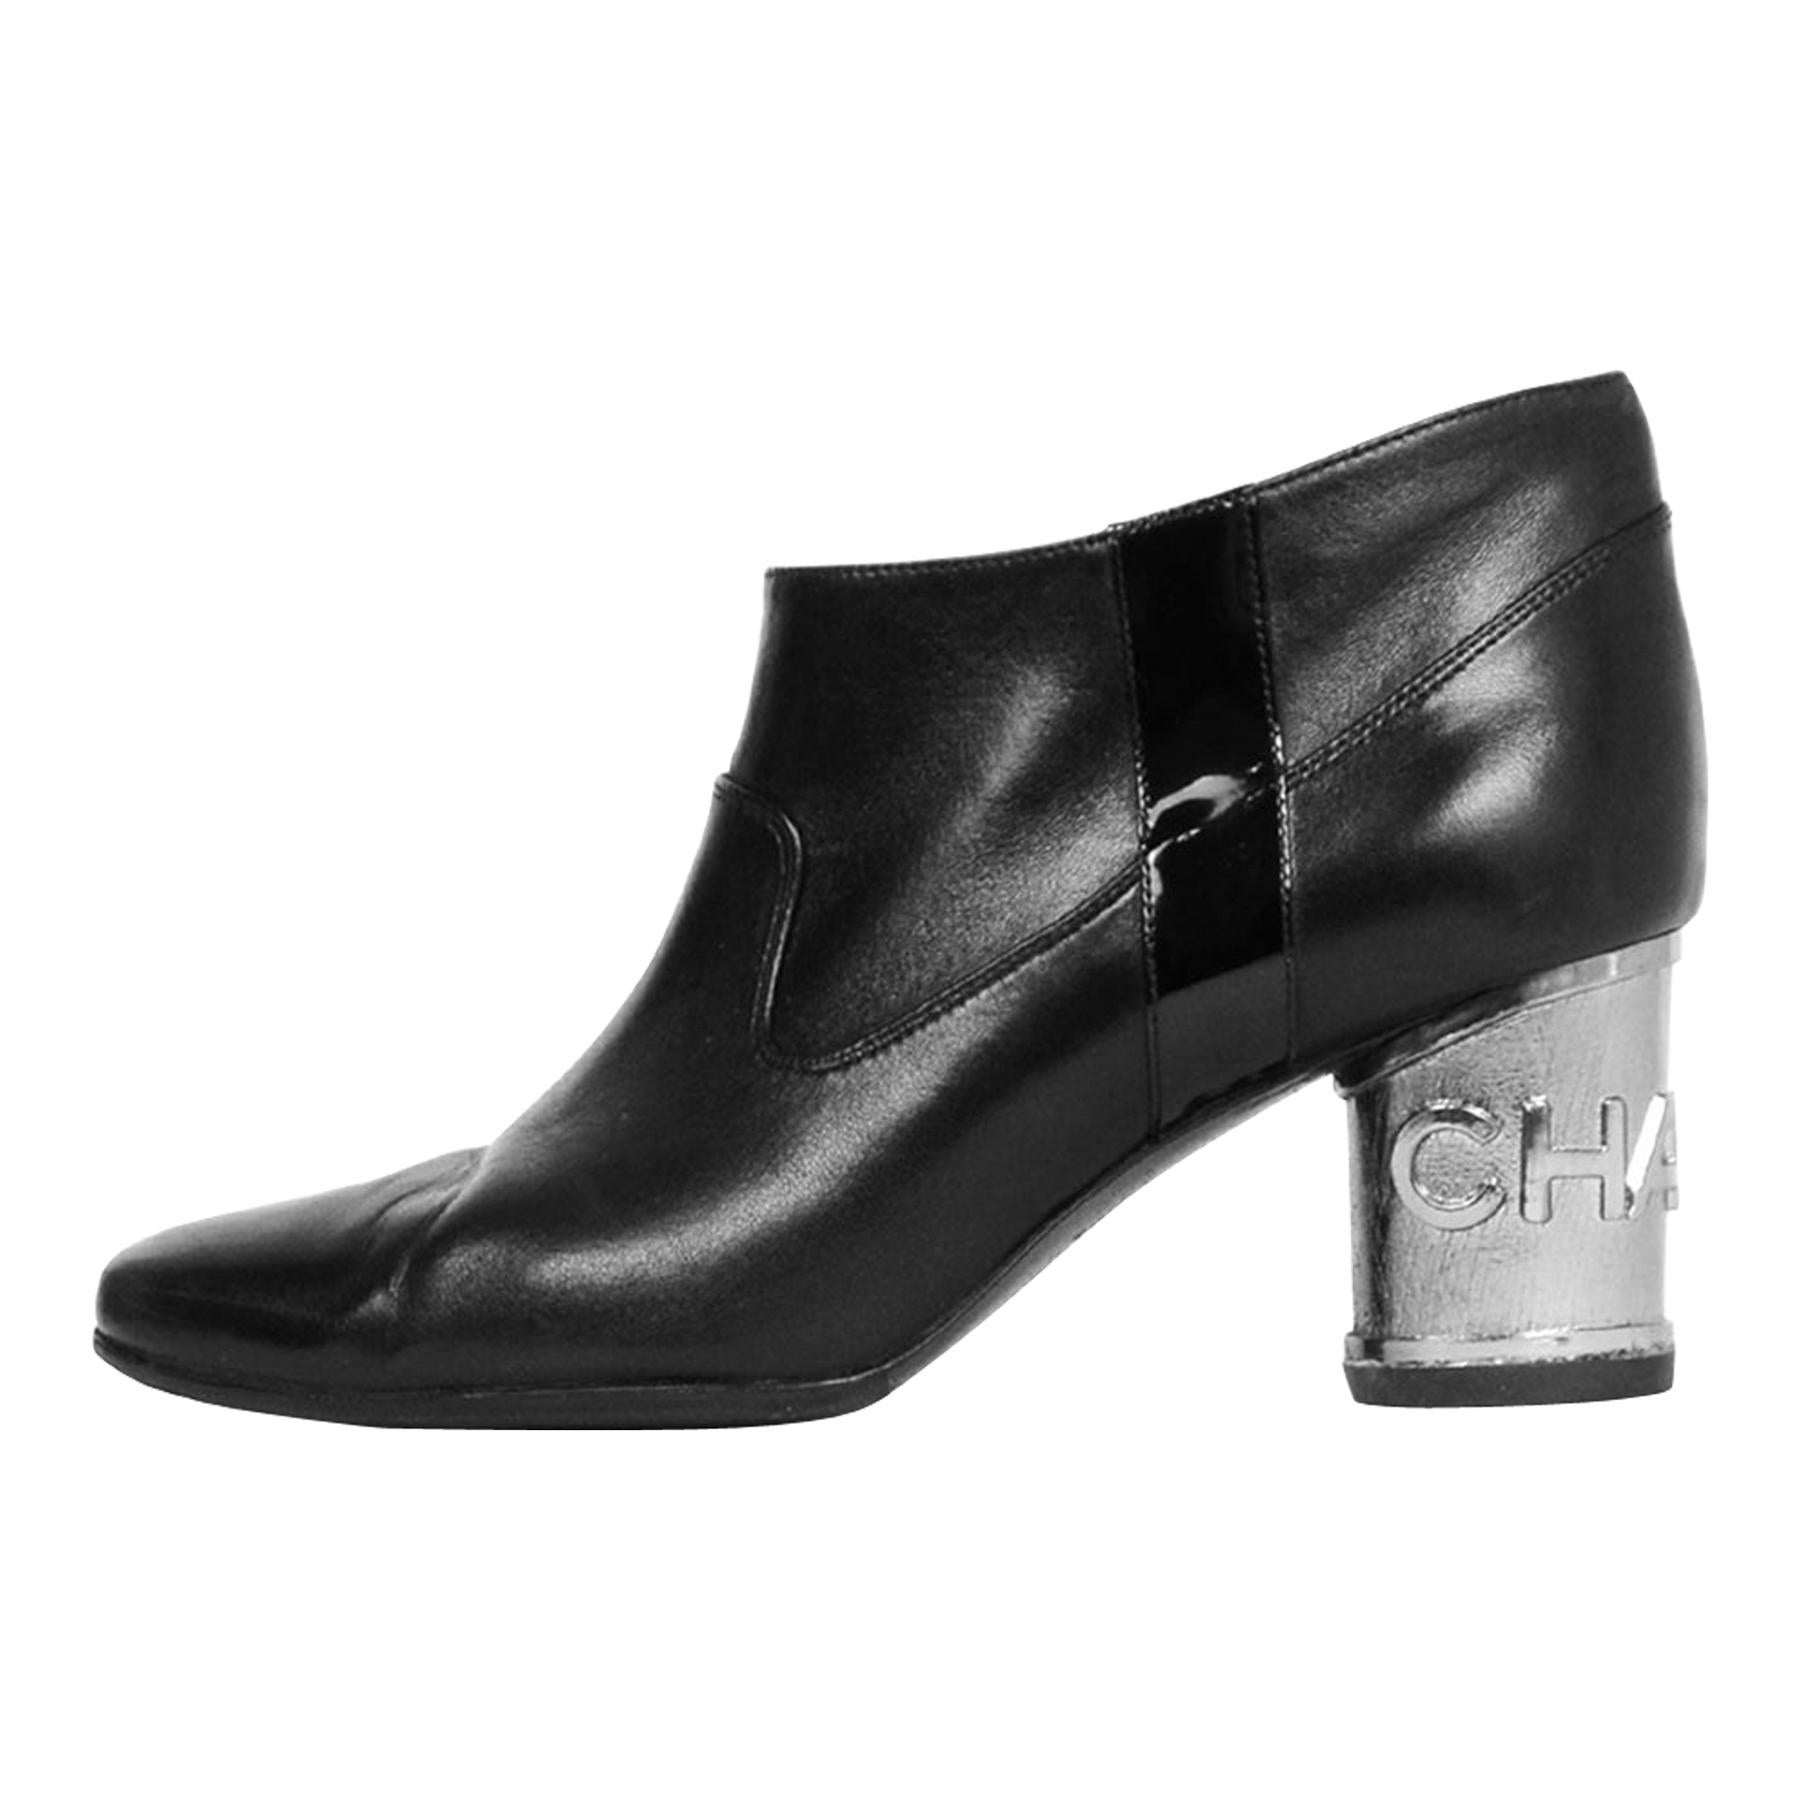 Chanel Black Leather Ankle Bootie with Metal Heel sz 39